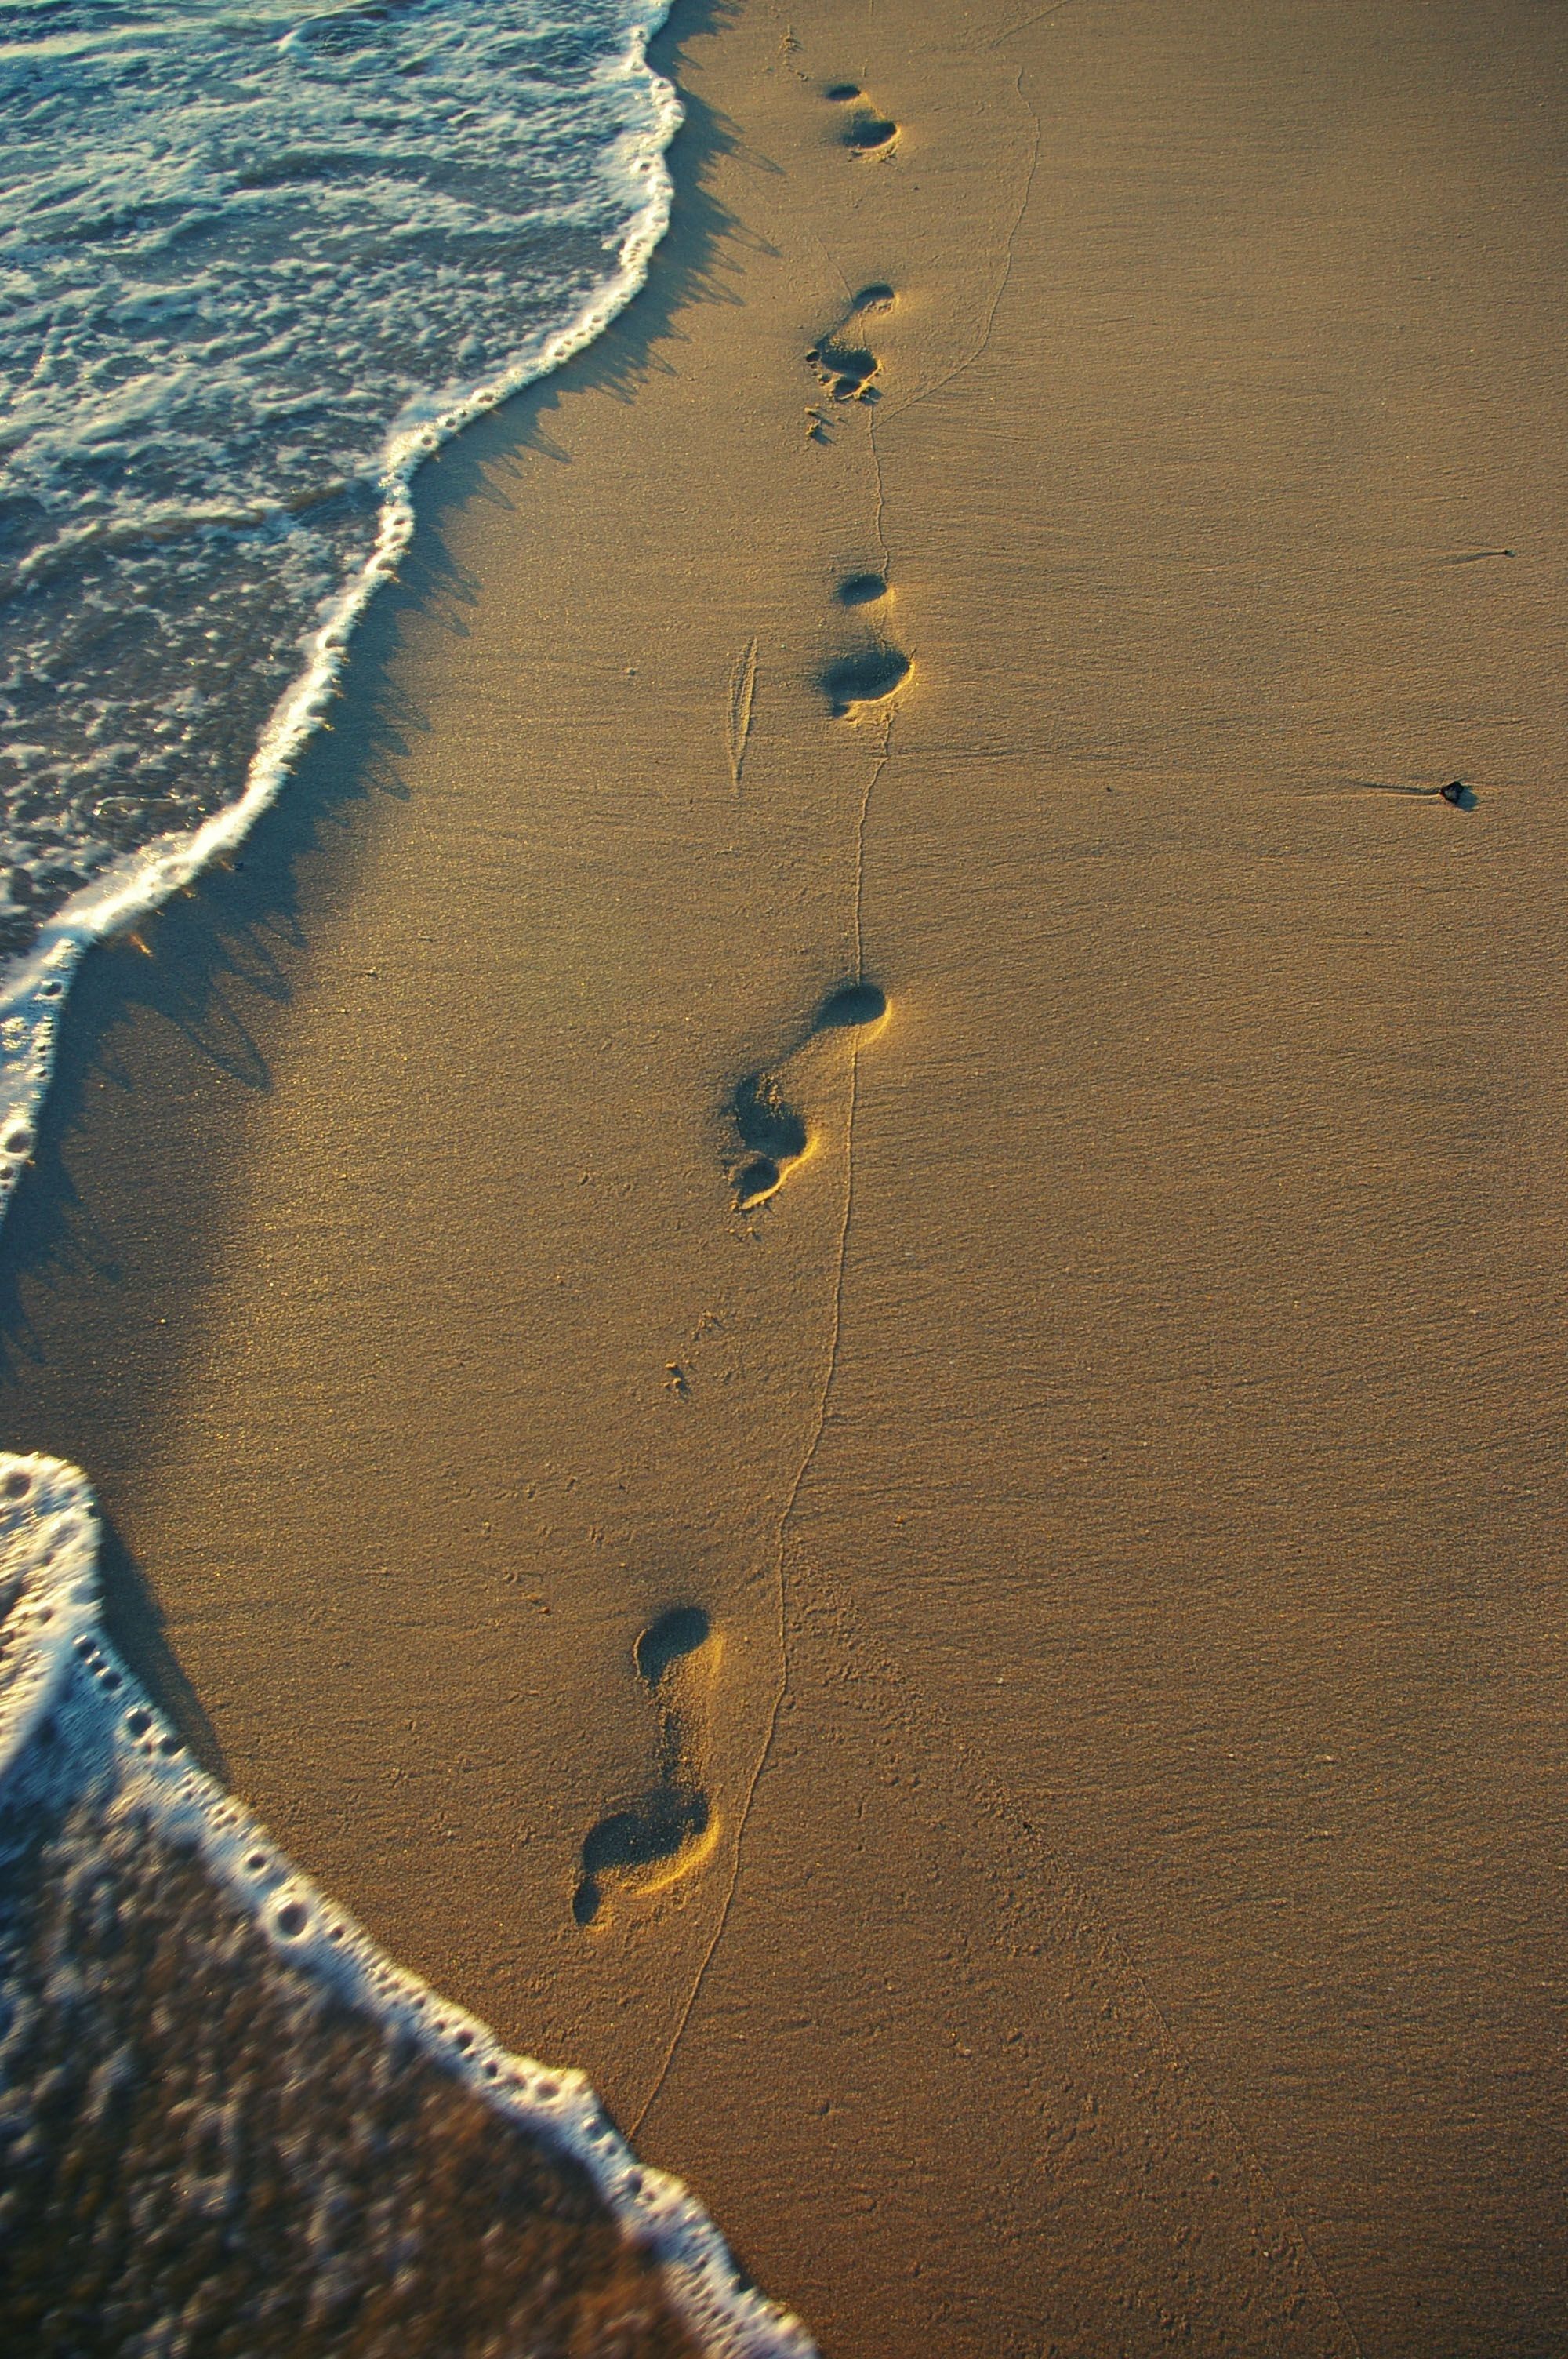 New Image Of Footprints In The Sand FULL HD 1920×1080 For PC